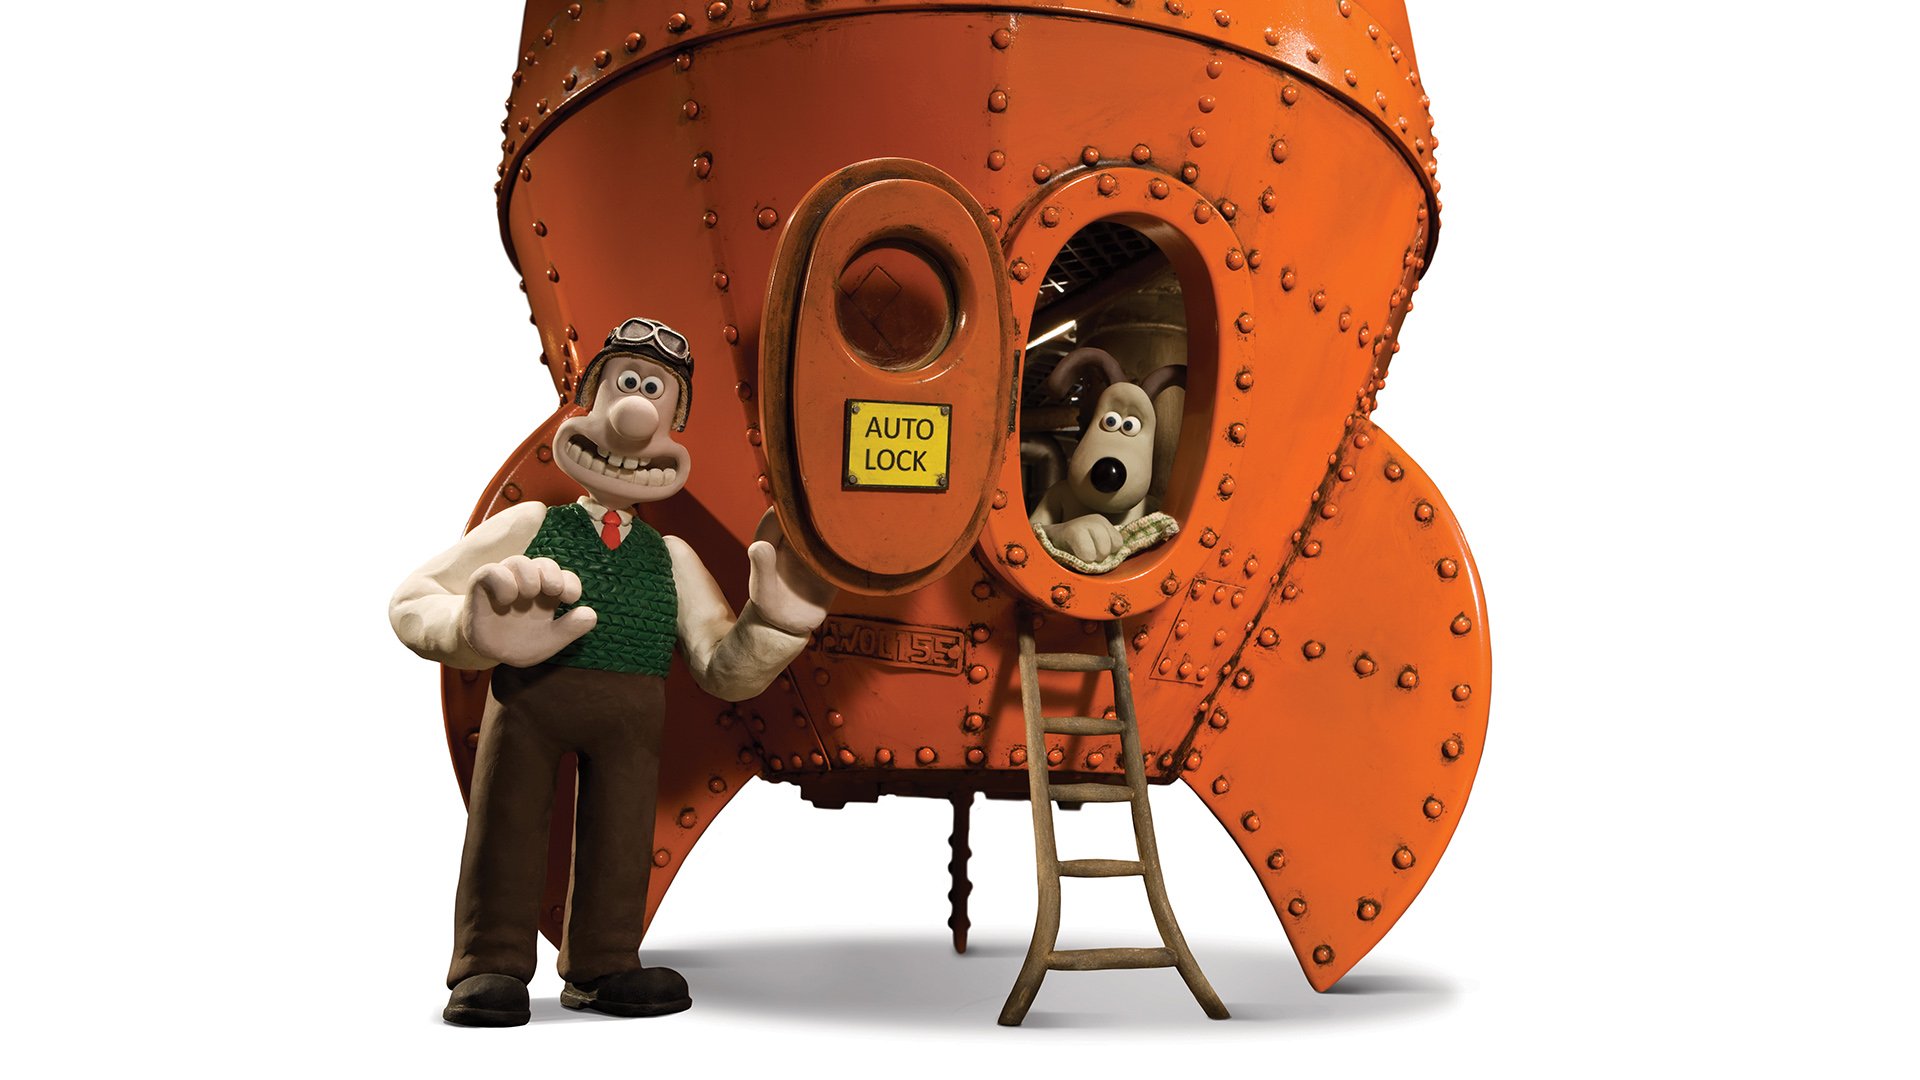 Wallace & Gromit HD Wallpaper | Background Image | 1920x1080 | ID:608175 - Wallpaper Abyss